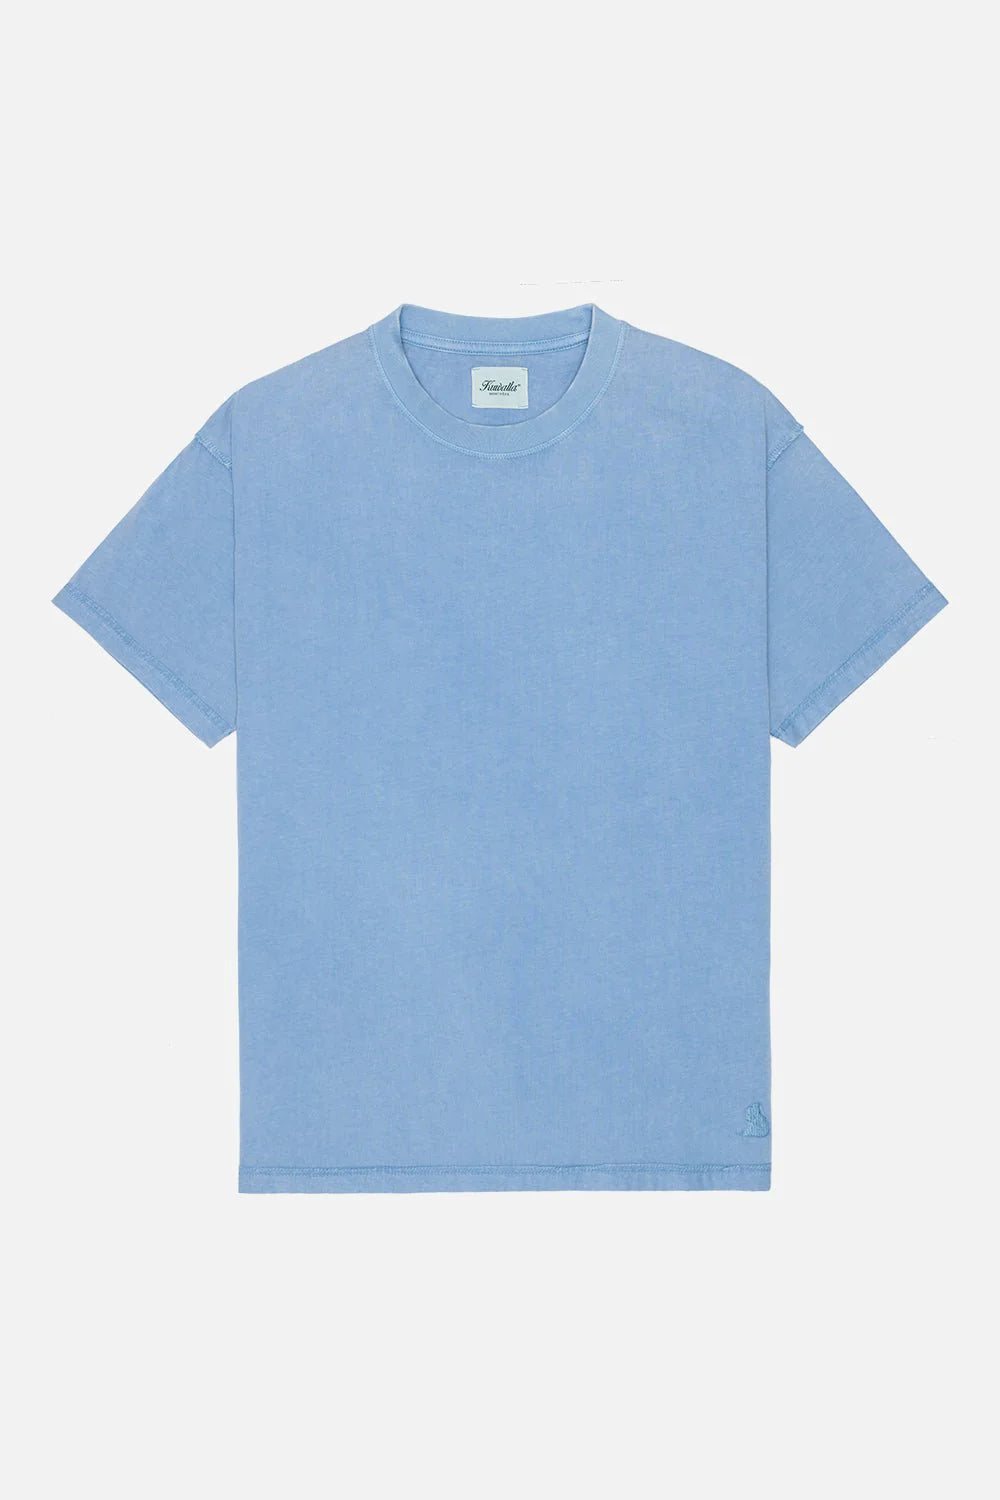 Inside Out Tee (Blue Bell)